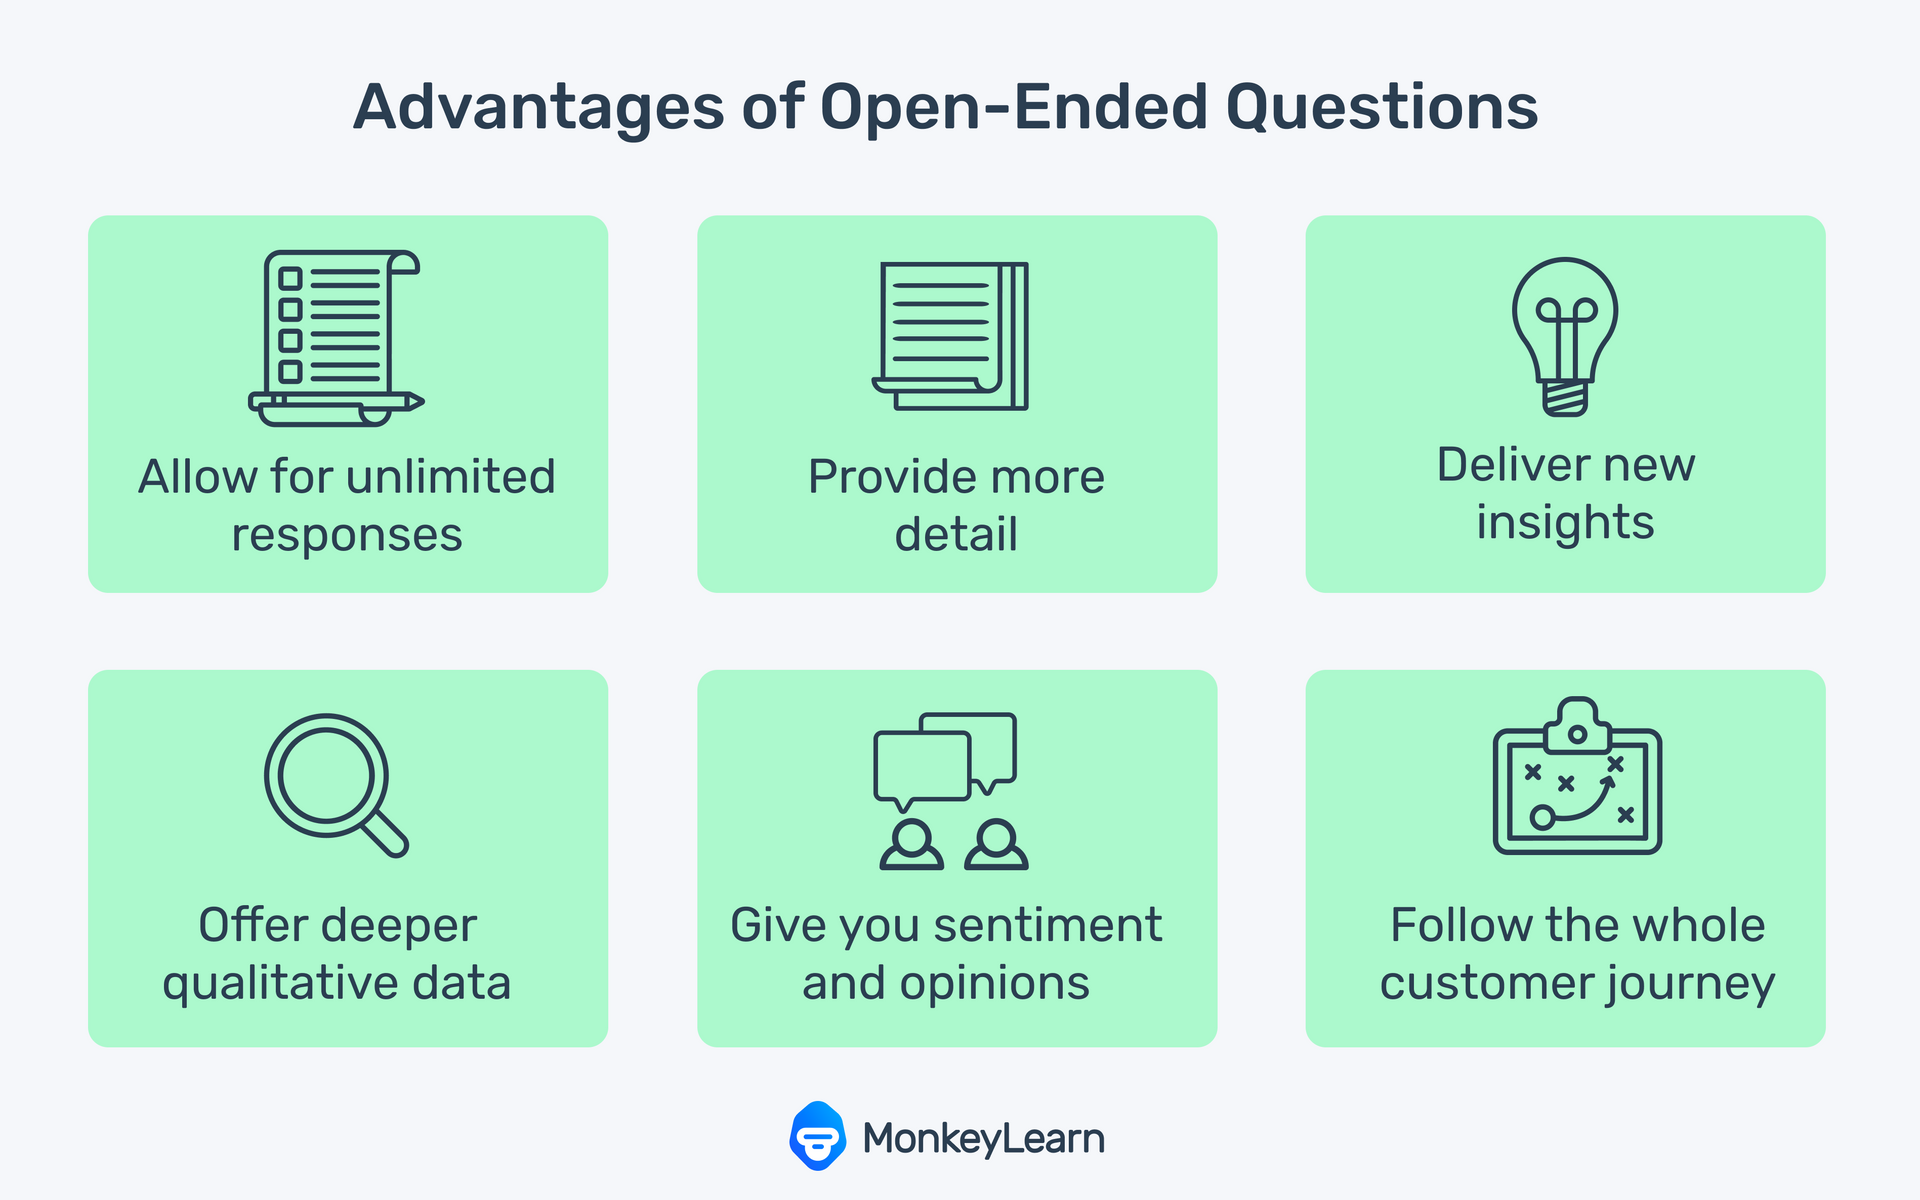 List of advantages of open ended questions.